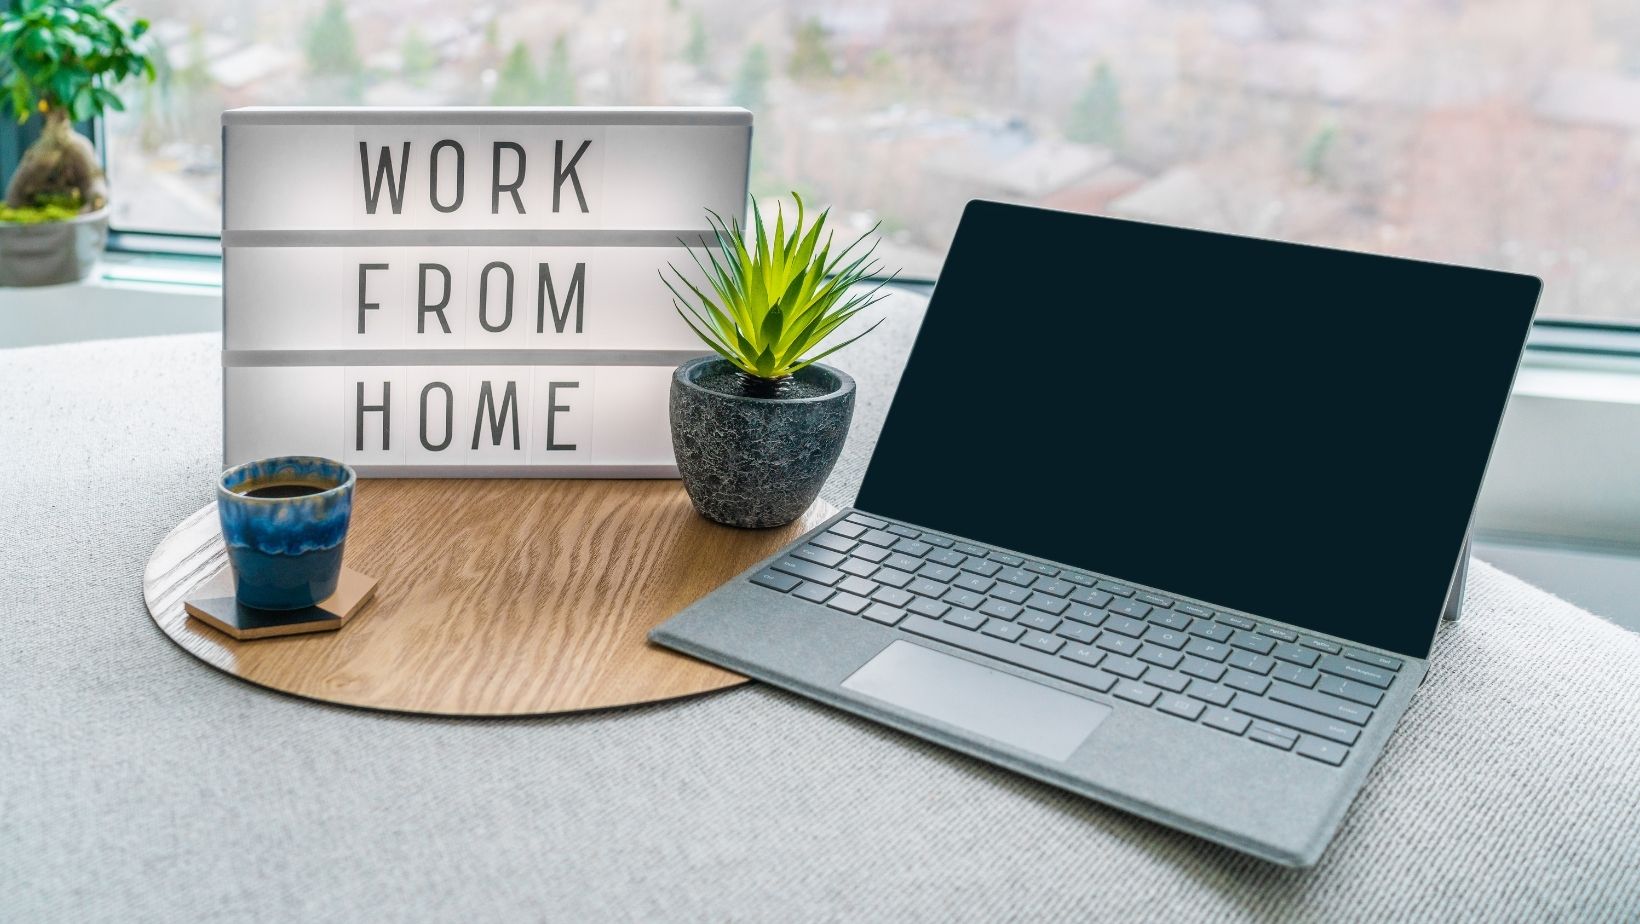 How to Work Remotely Without Losing Focus